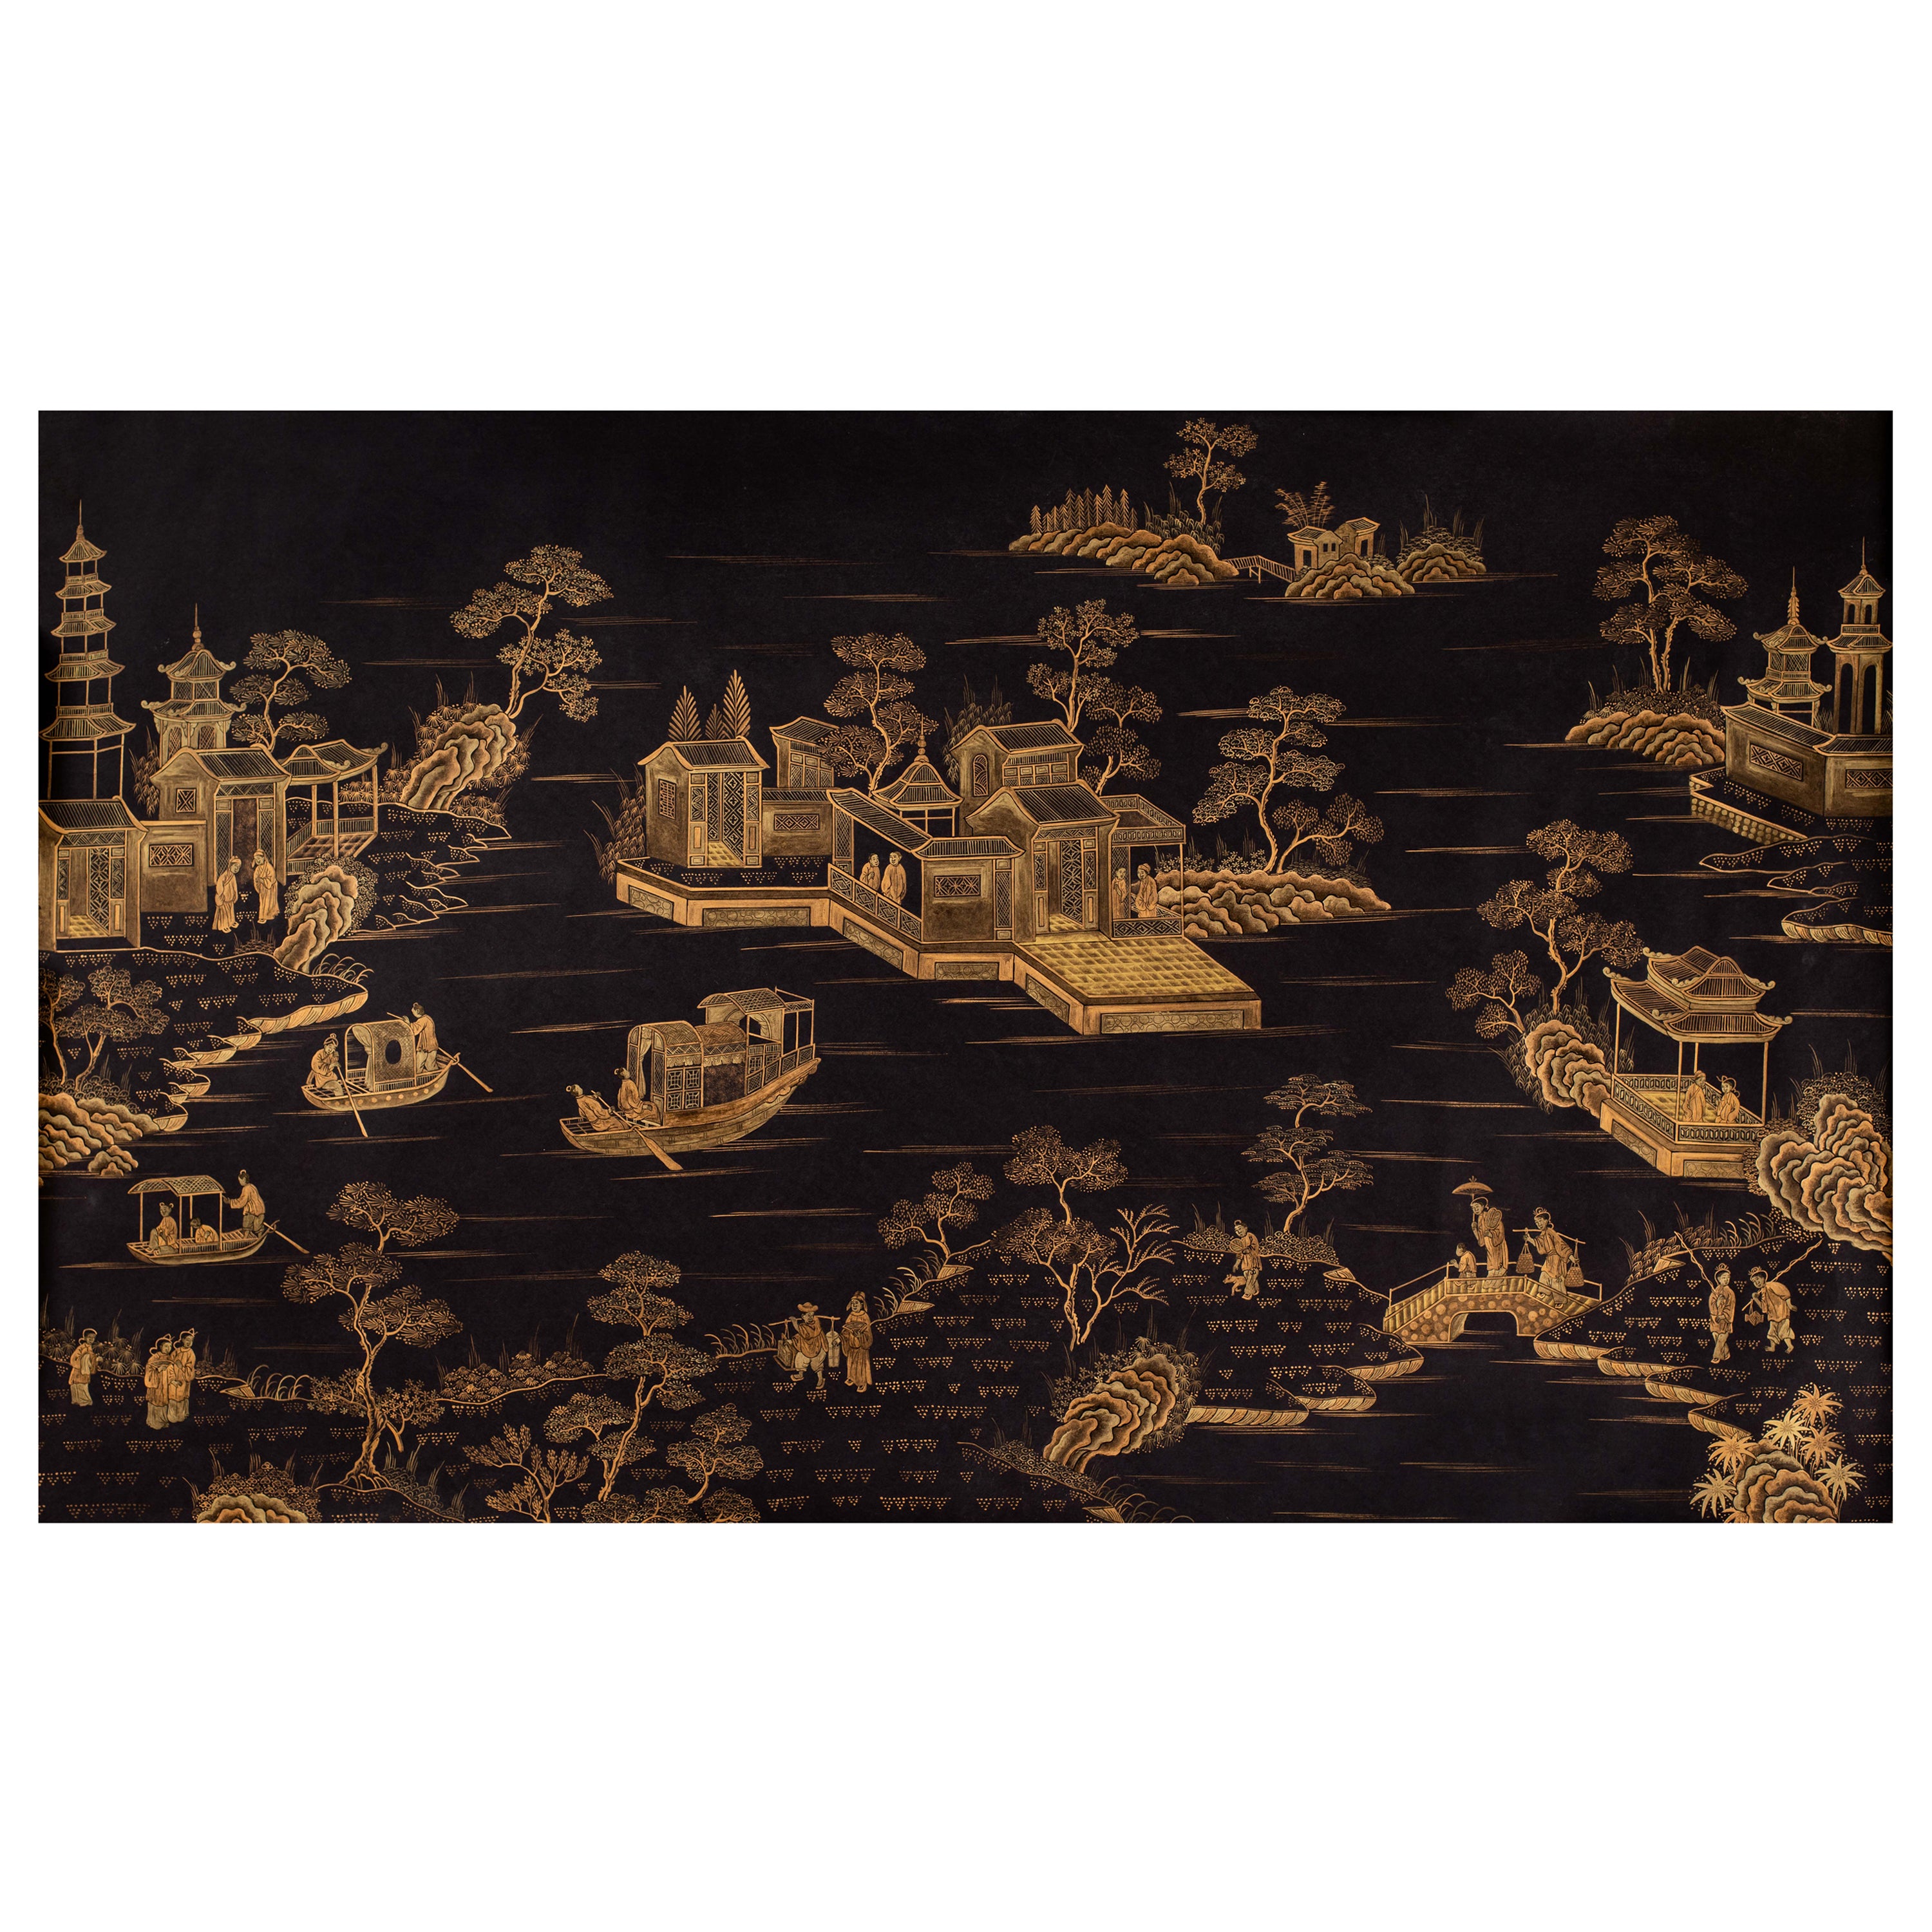 Chinoiserie Hand-Painted Wallpaper Panels of Golden Pavilions on Black